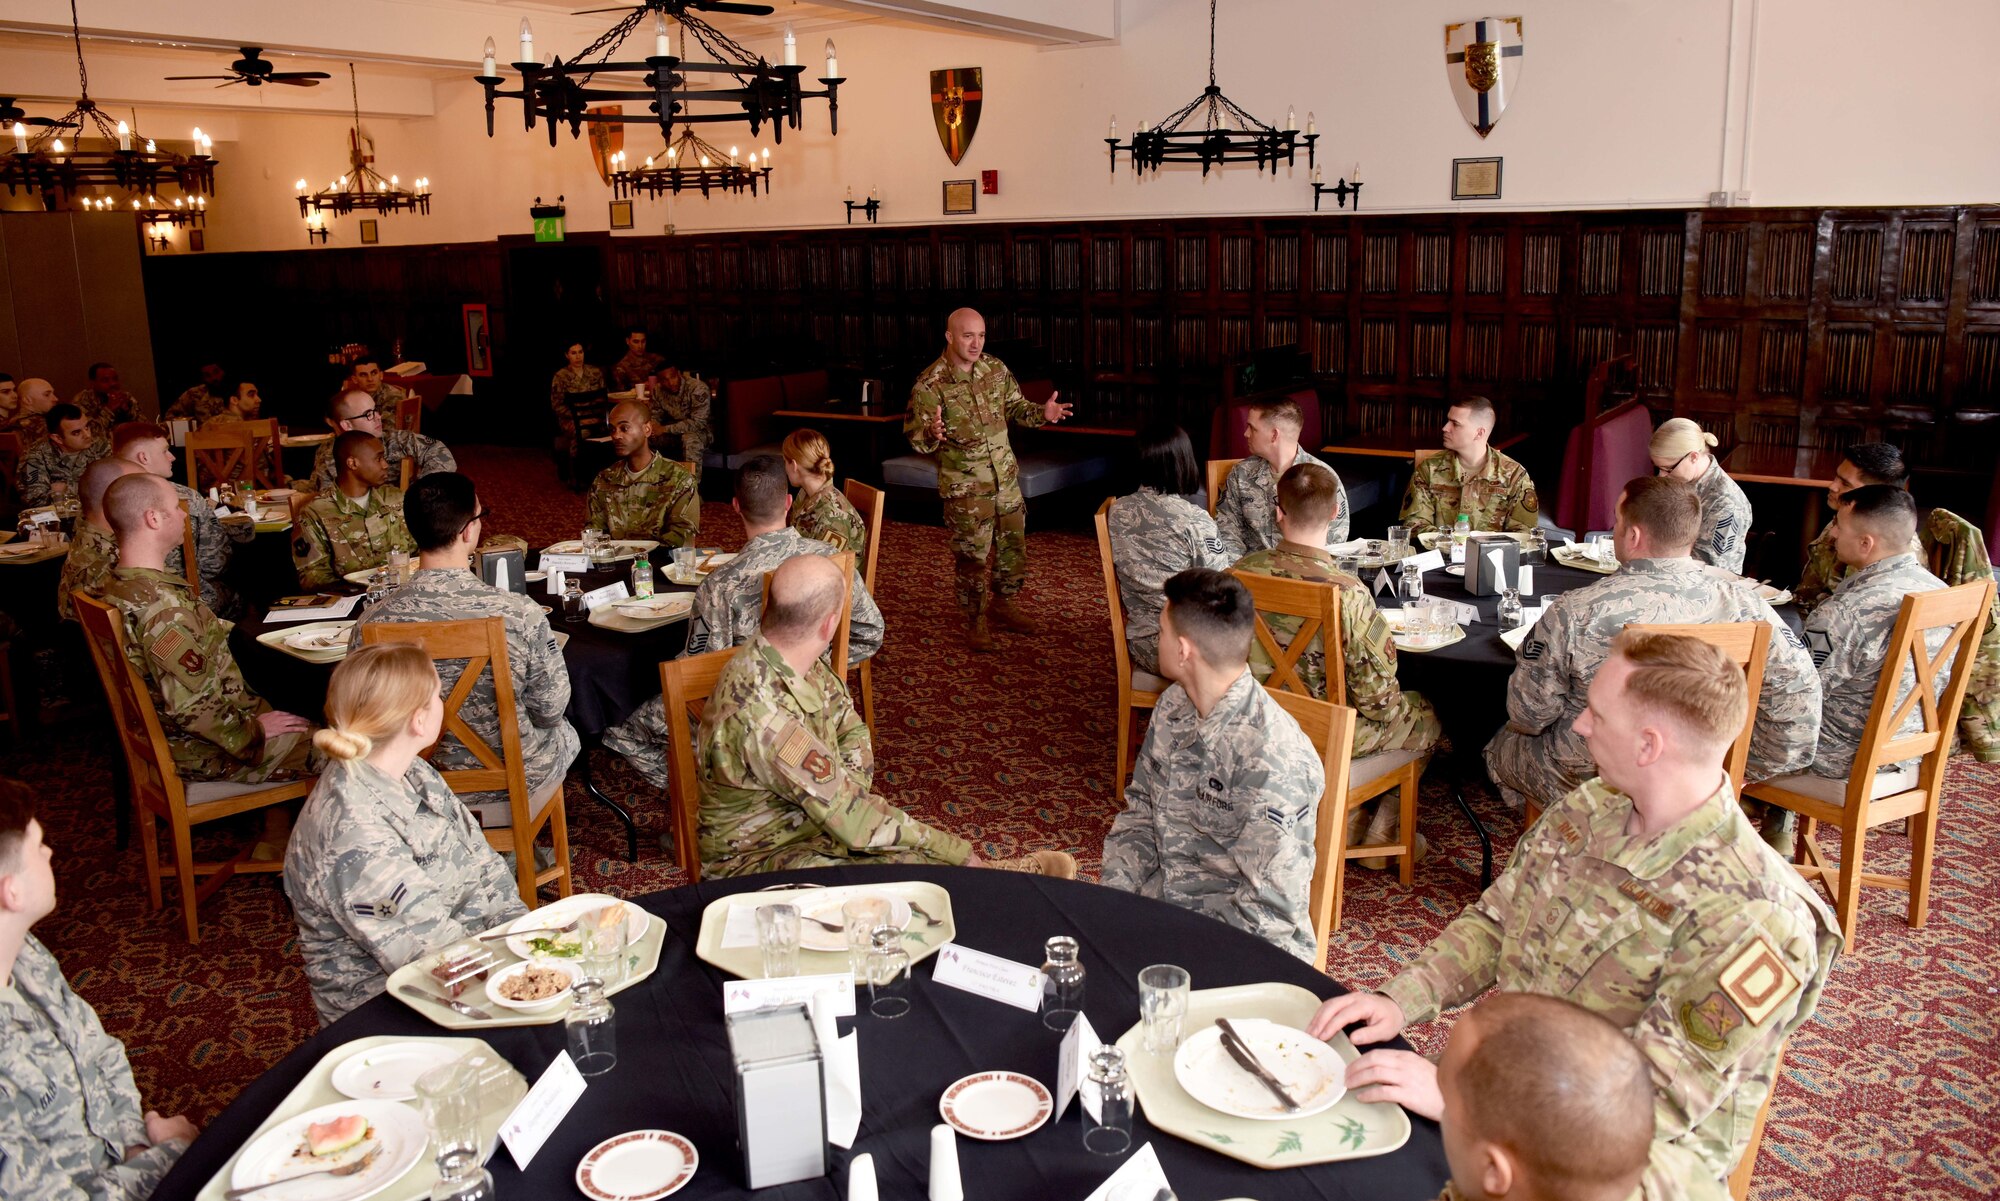 U.S. Air Force Chief Master Sgt. Anthony Cruz Munoz speaks with 100th Air Refueling Wing Airmen during lunch at the Gateway Dining Facility at RAF Mildenhall, England, April 3, 2019. Third AF leadership discussed infrastructure development with wing leadership and met with 100th Air Refueling Wing Airmen. (U.S. Air Force photo by Airman 1st Class Brandon Esau)